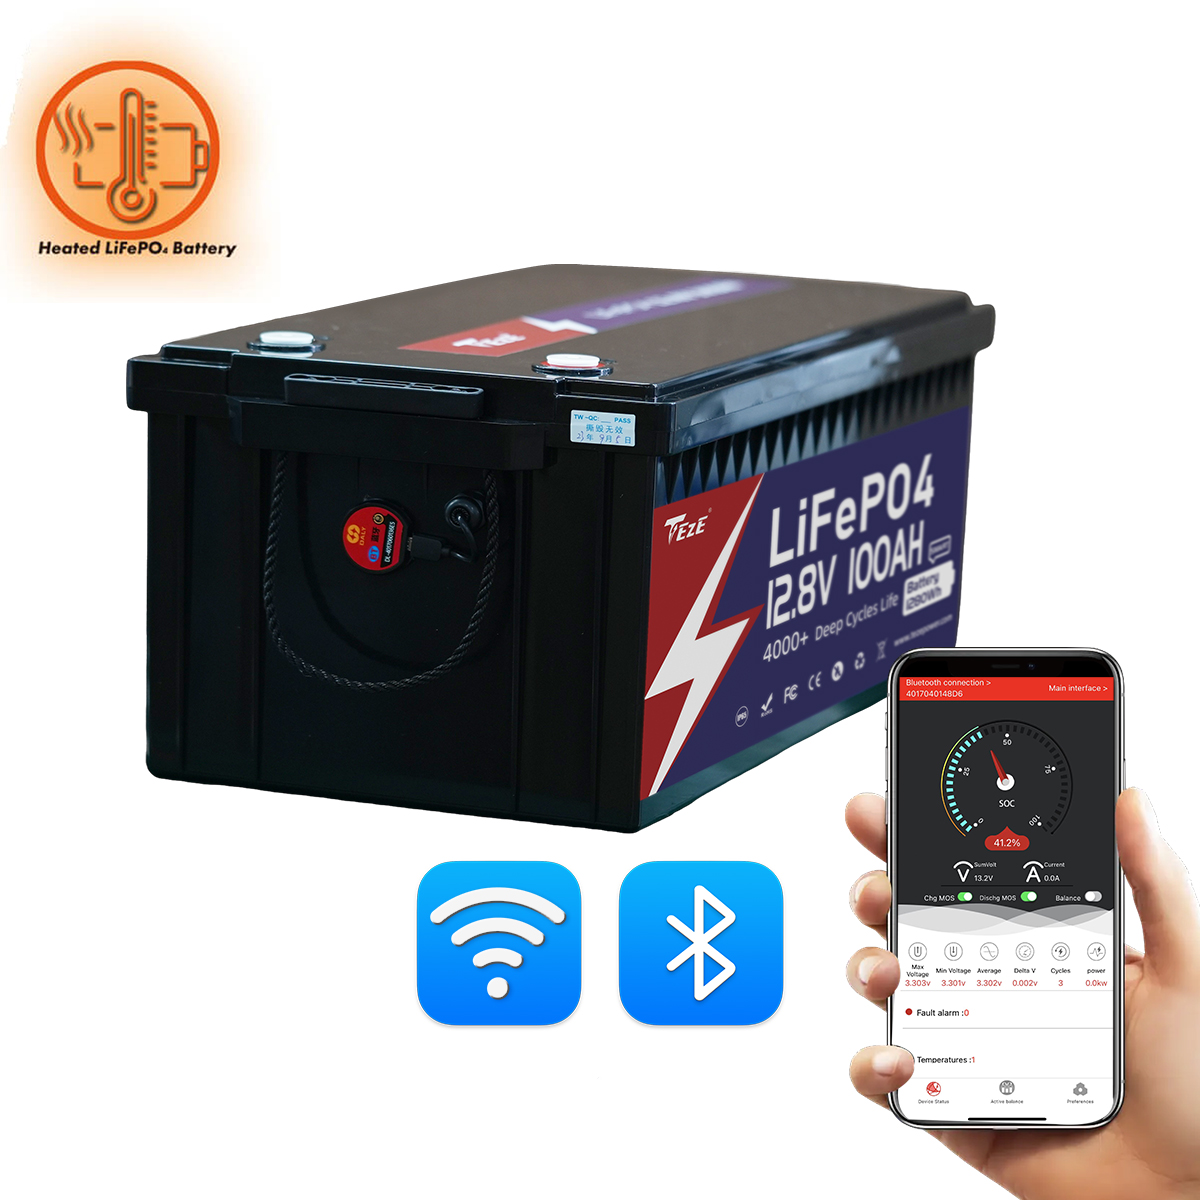 New Add WiFi-TezePower 12V 100Ah LiFePO4 Battery with WIFI and Bluetooth, Self-heating and Active Balancer, Built-in 100A Daly BMS(WIFI External Version)